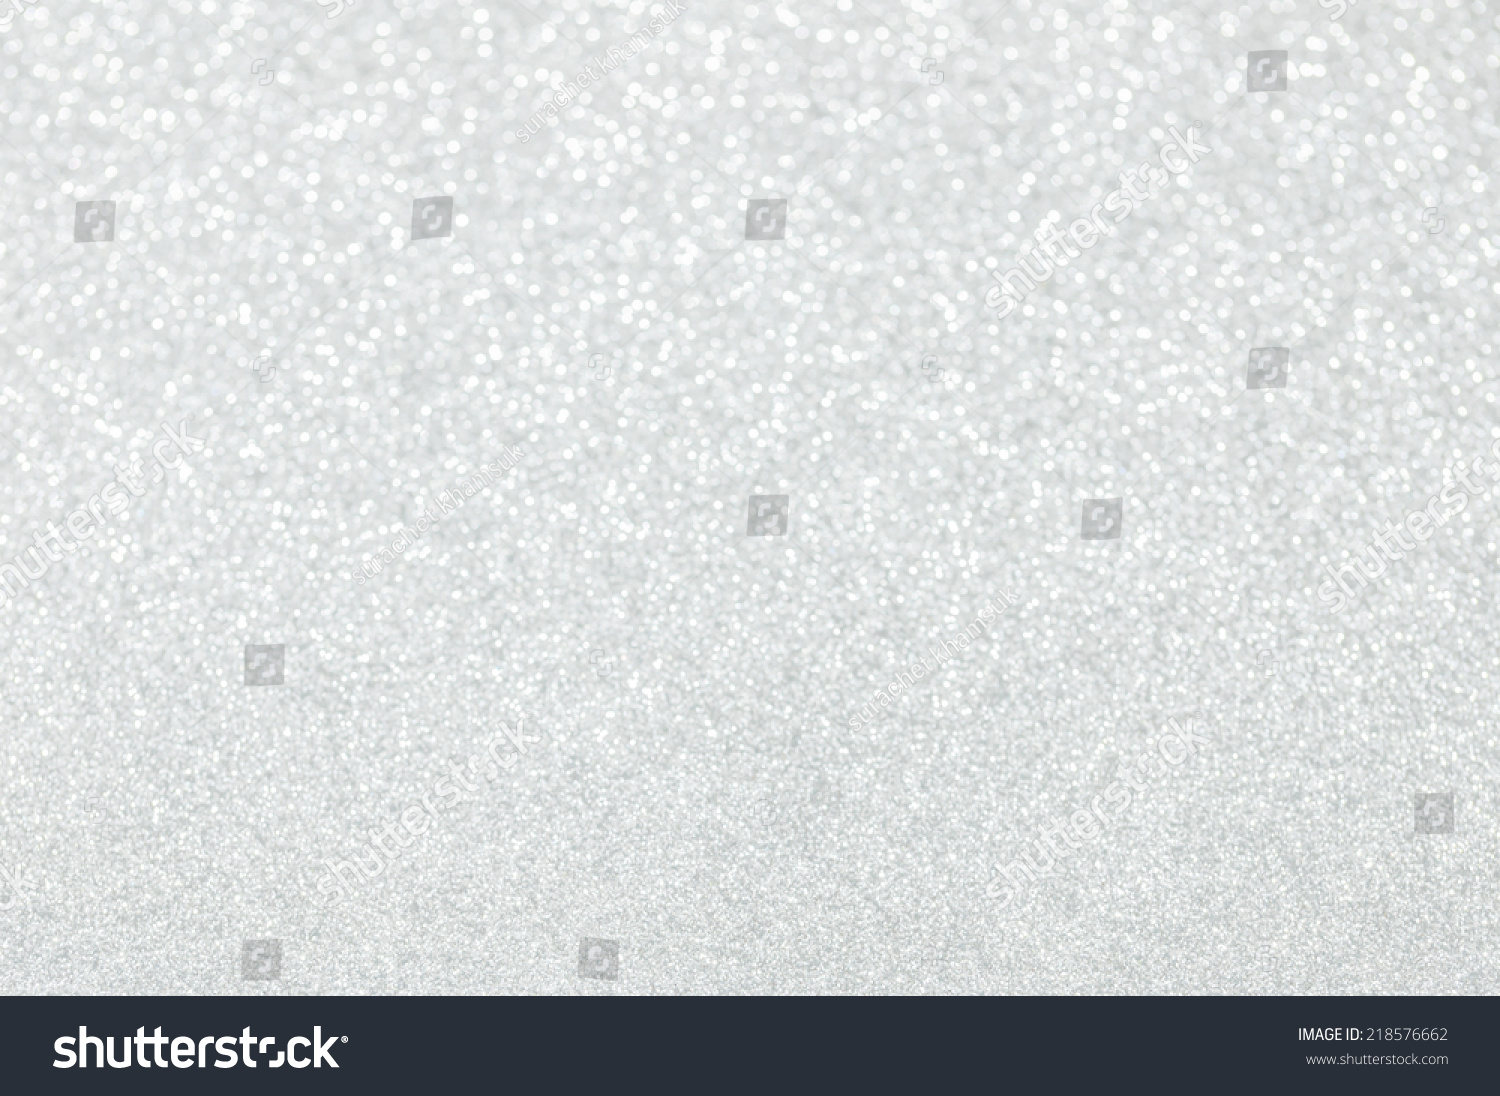 white glitter christmas abstract background #218576662